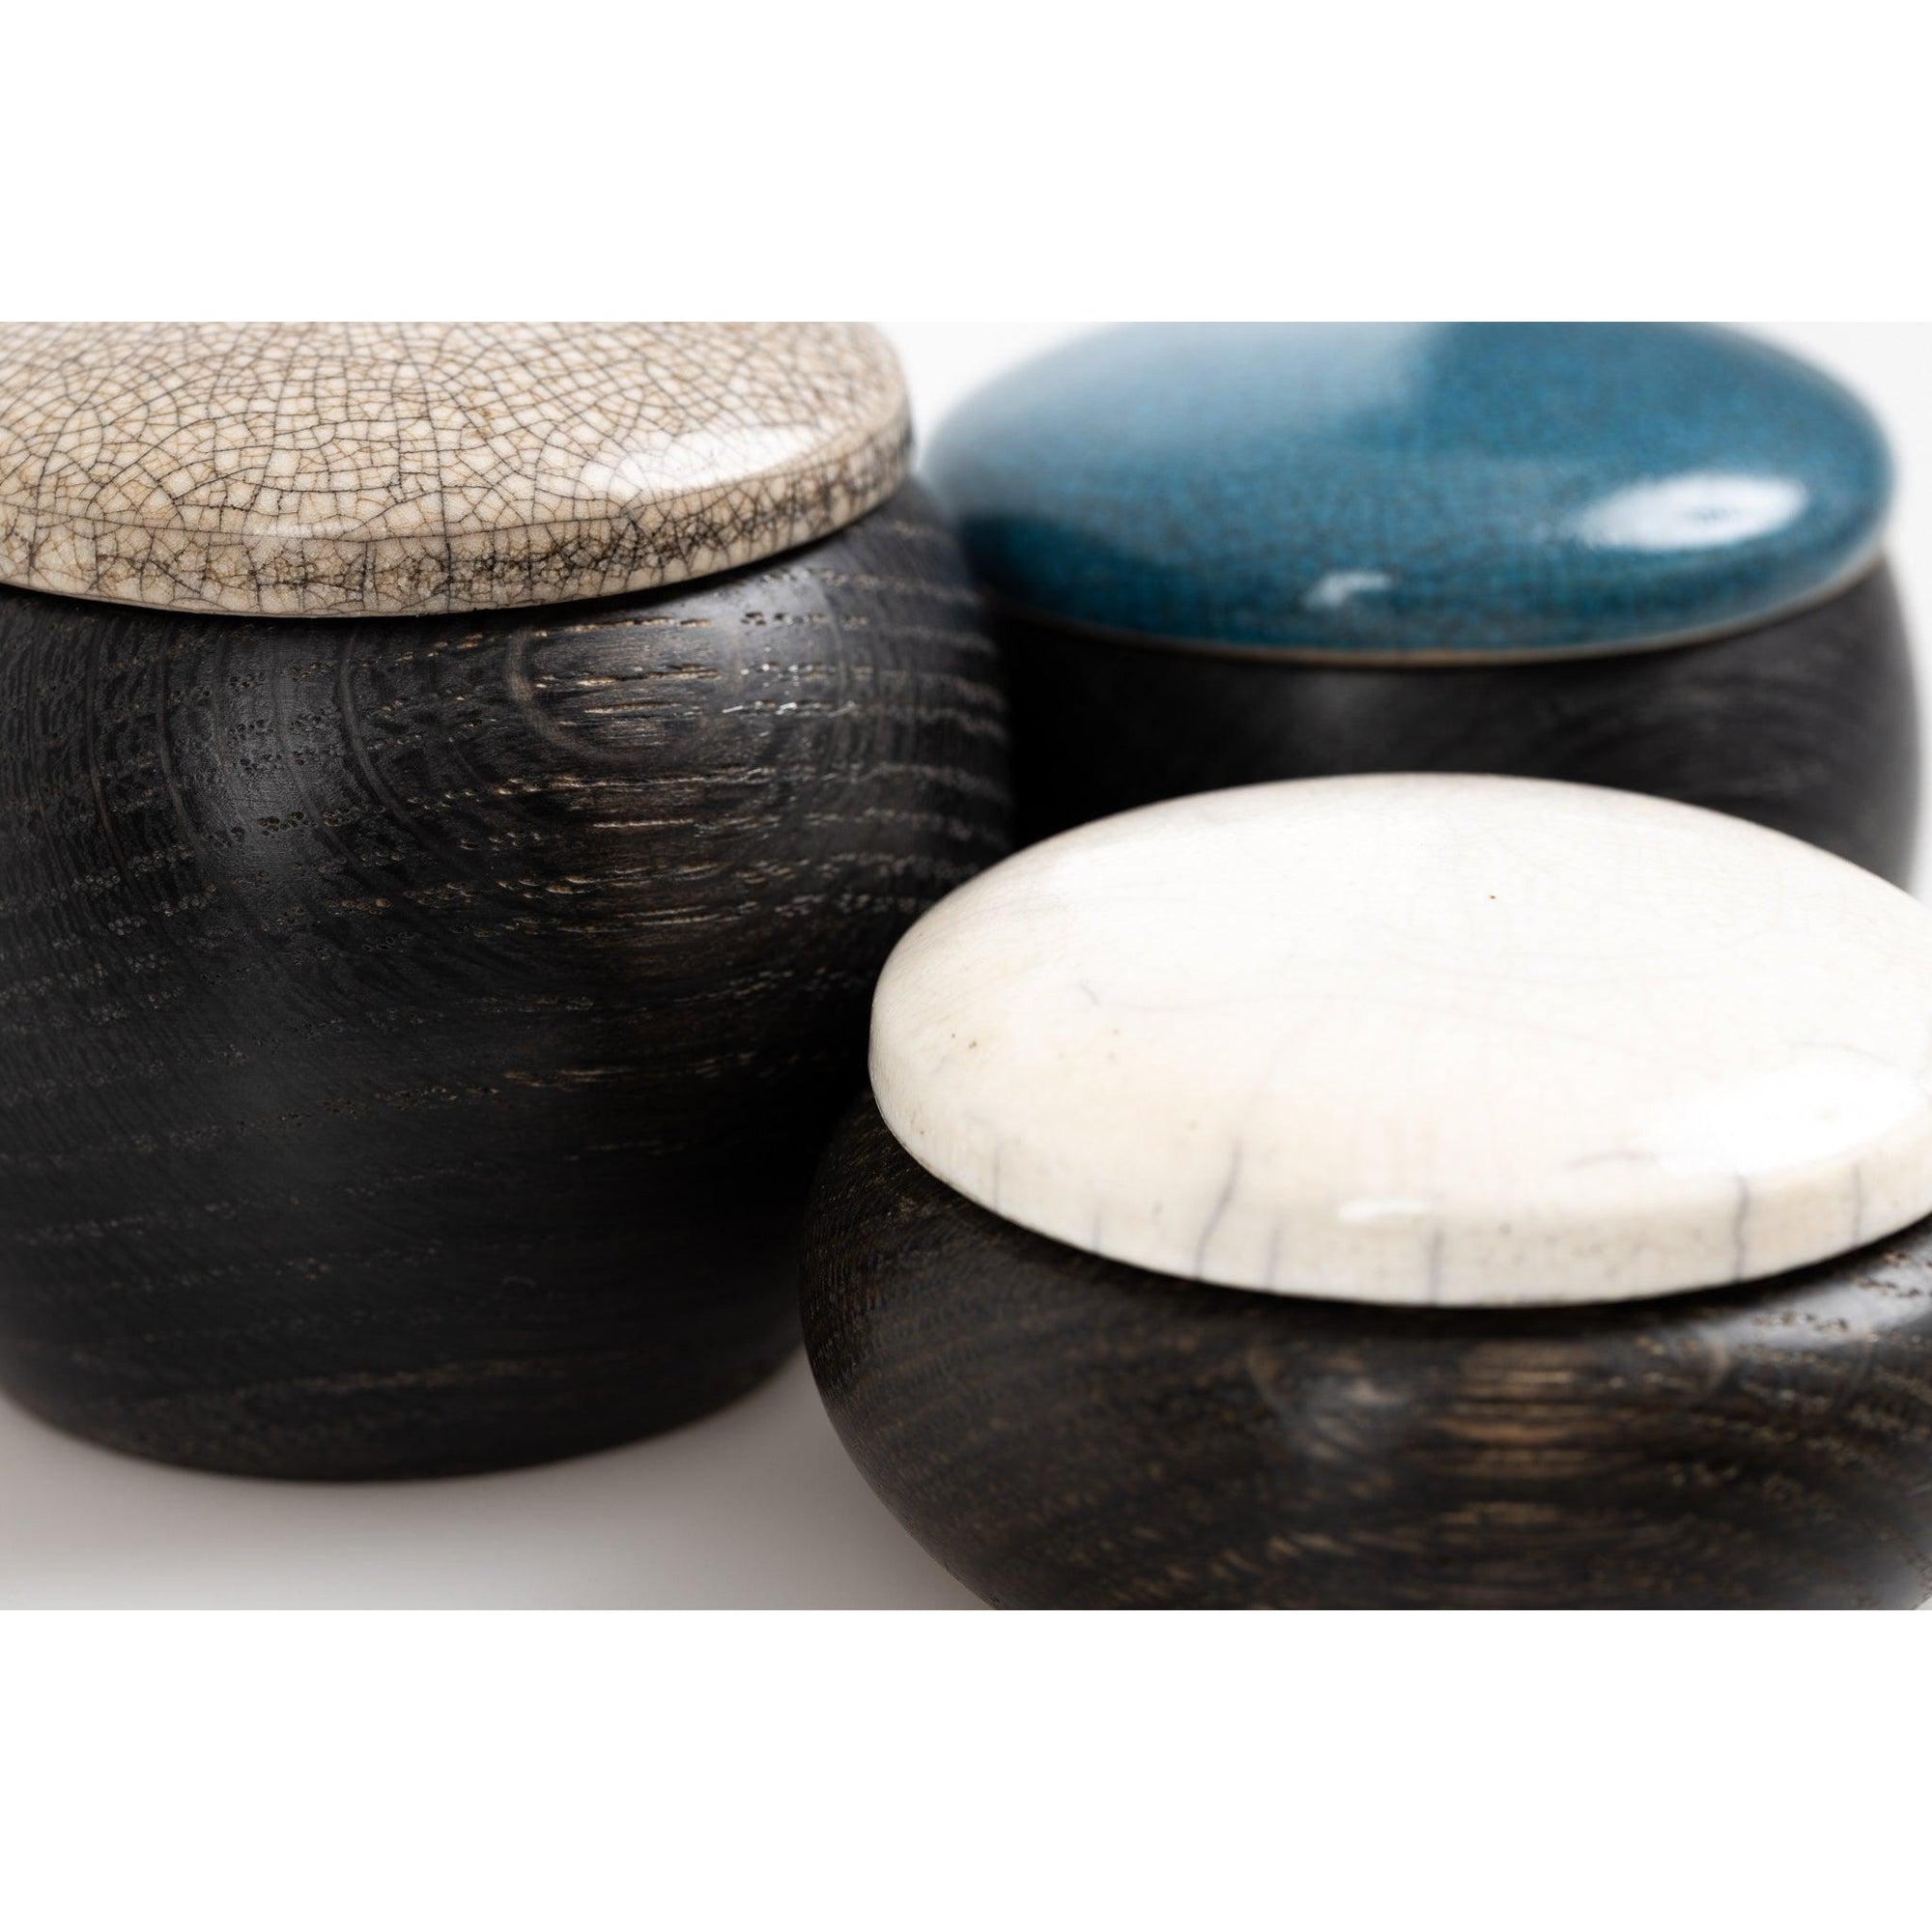 KSCC2 Ebonised Wave Pot by Kate Schuricht, available at Padstow Gallery, Cornwall